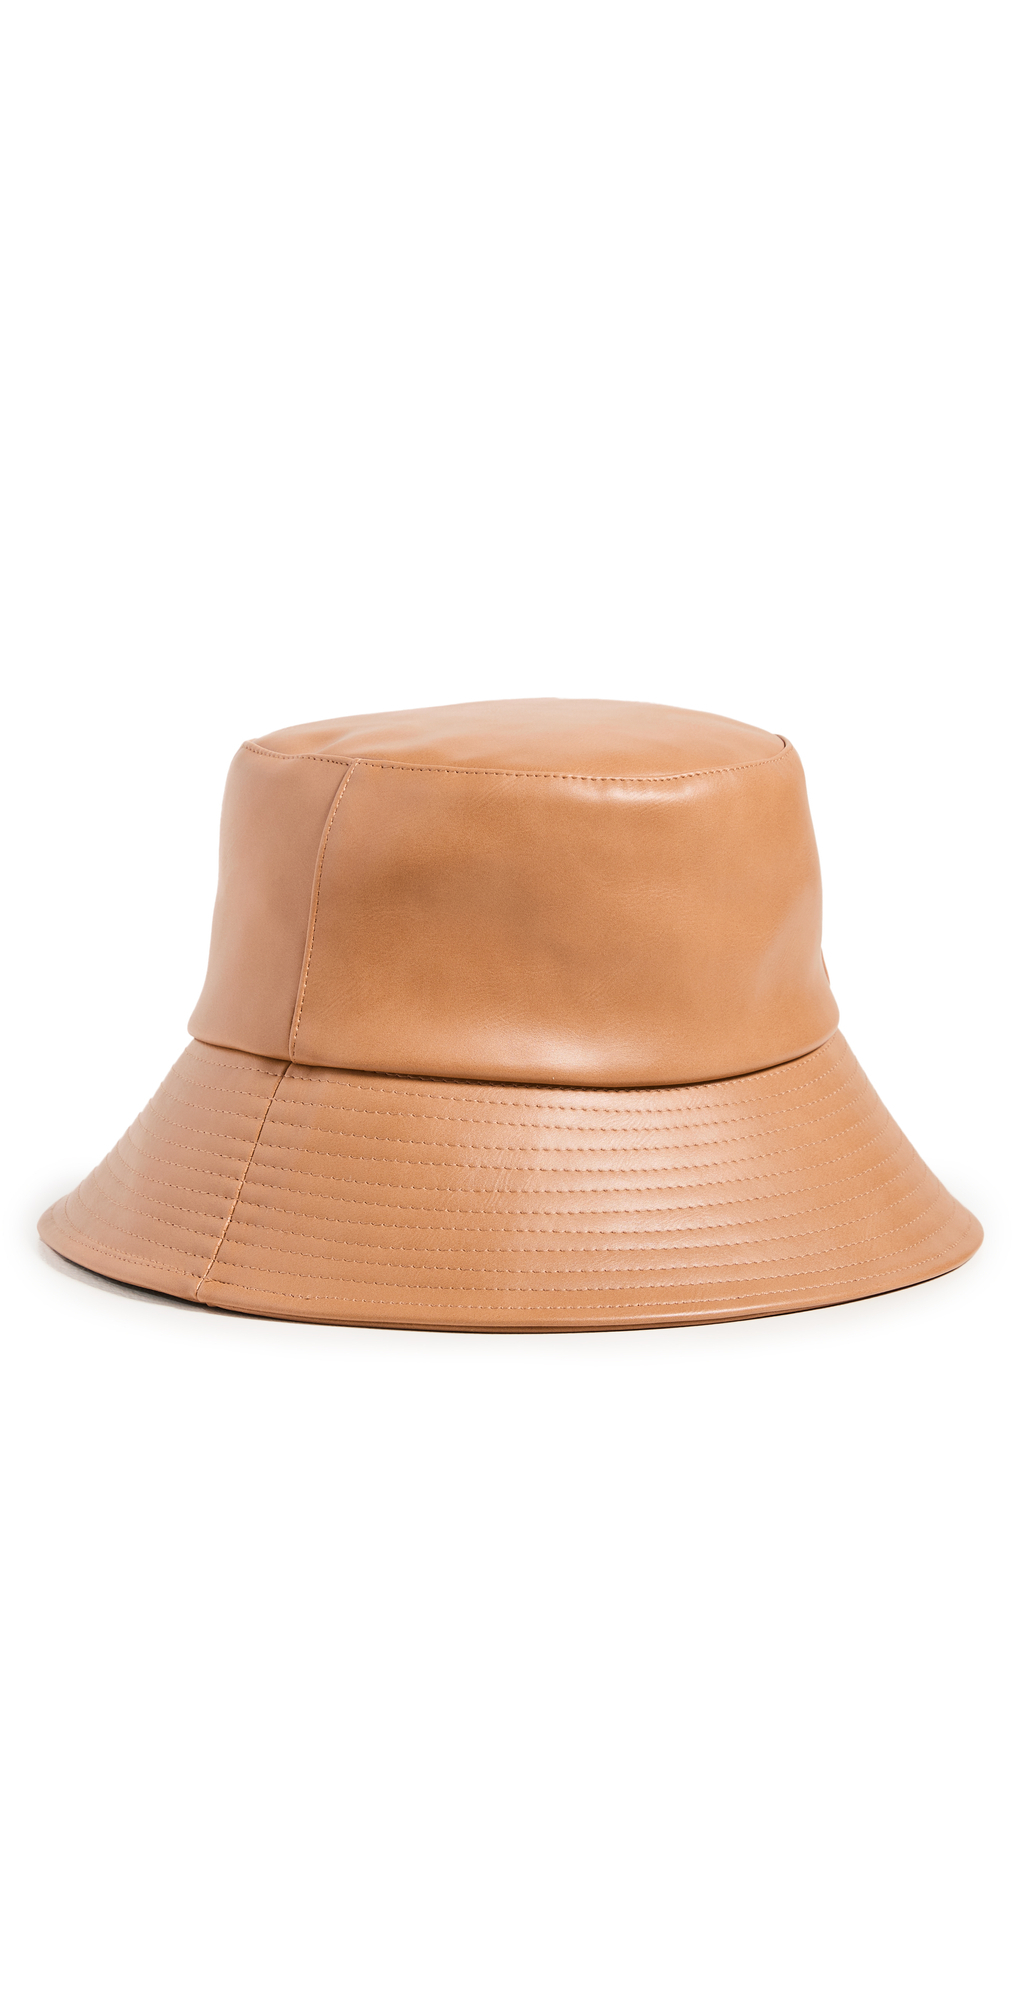 Lack Of Color Vegan Leather Wave Bucket Hat in tan